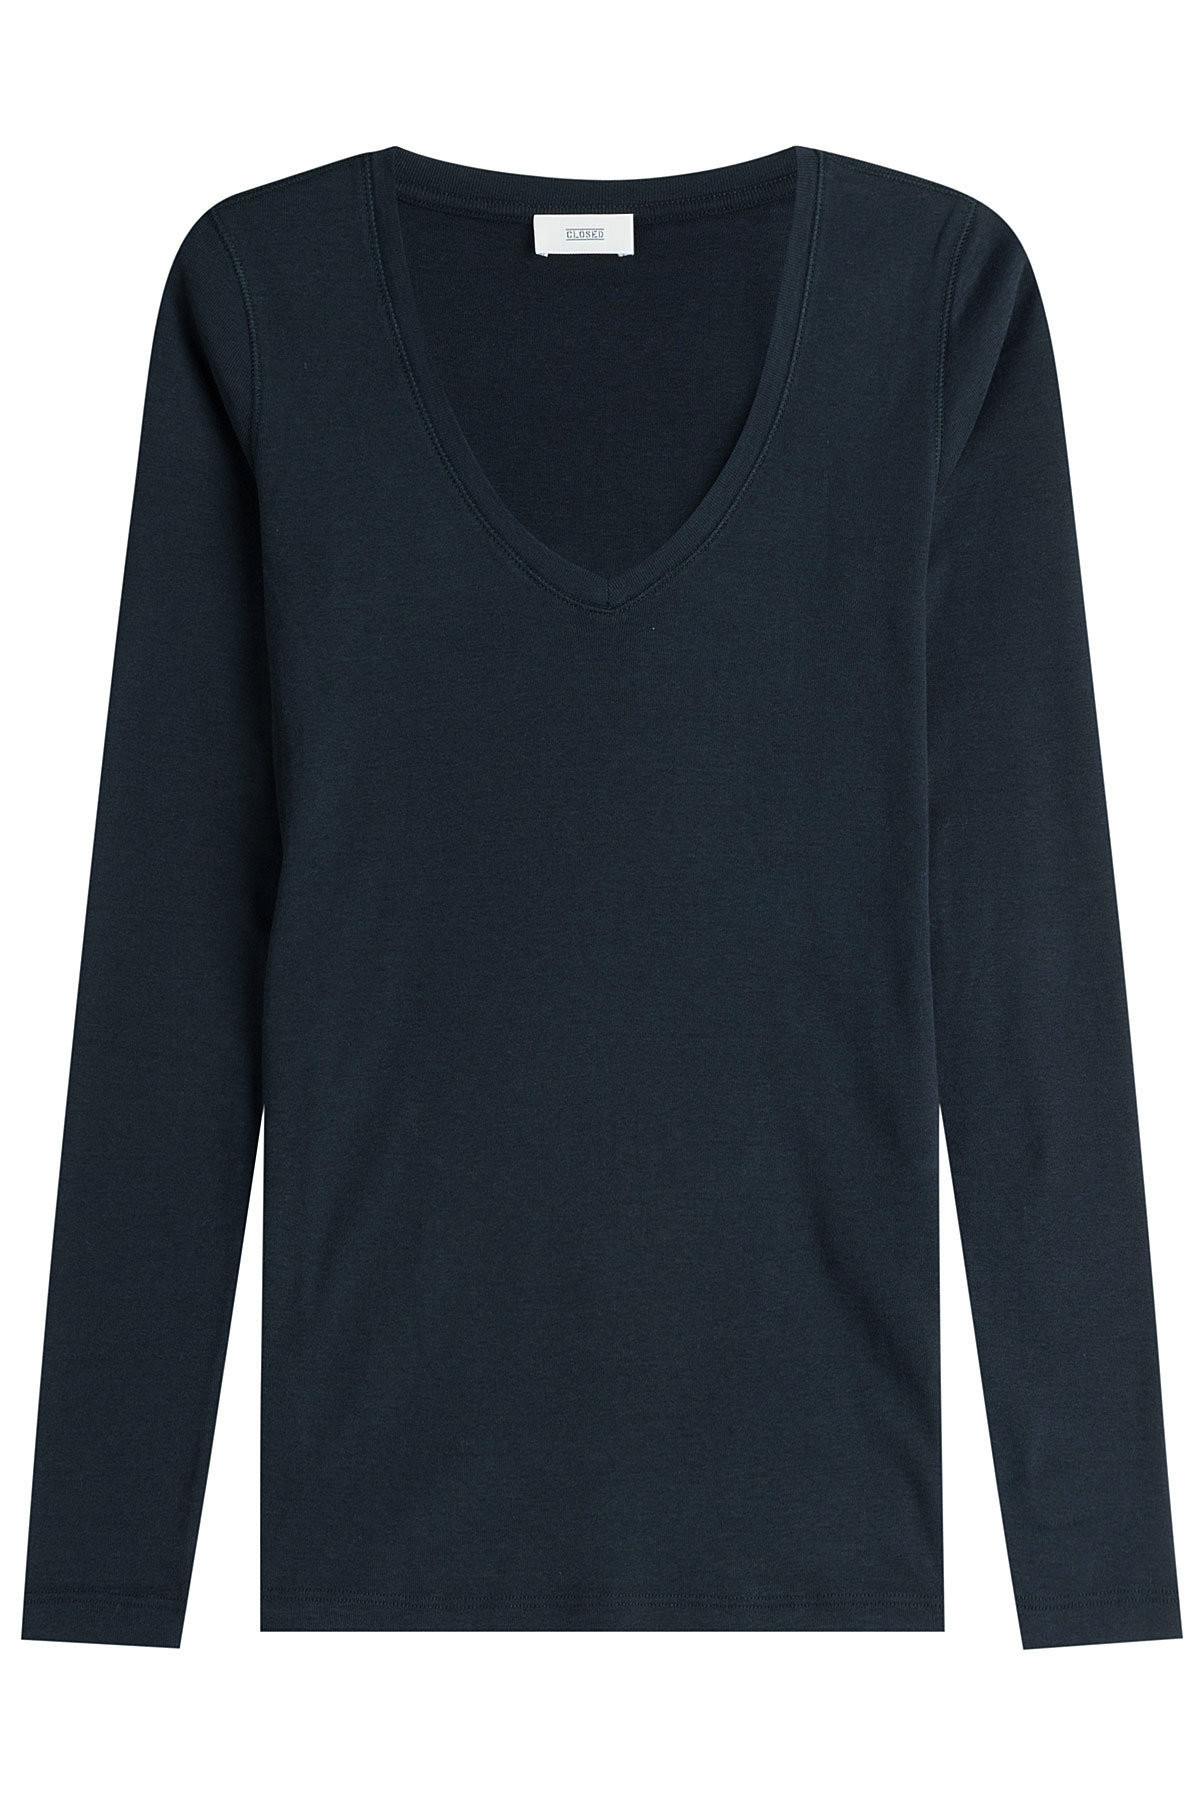 Closed - Long Sleeved Cotton Blend Top